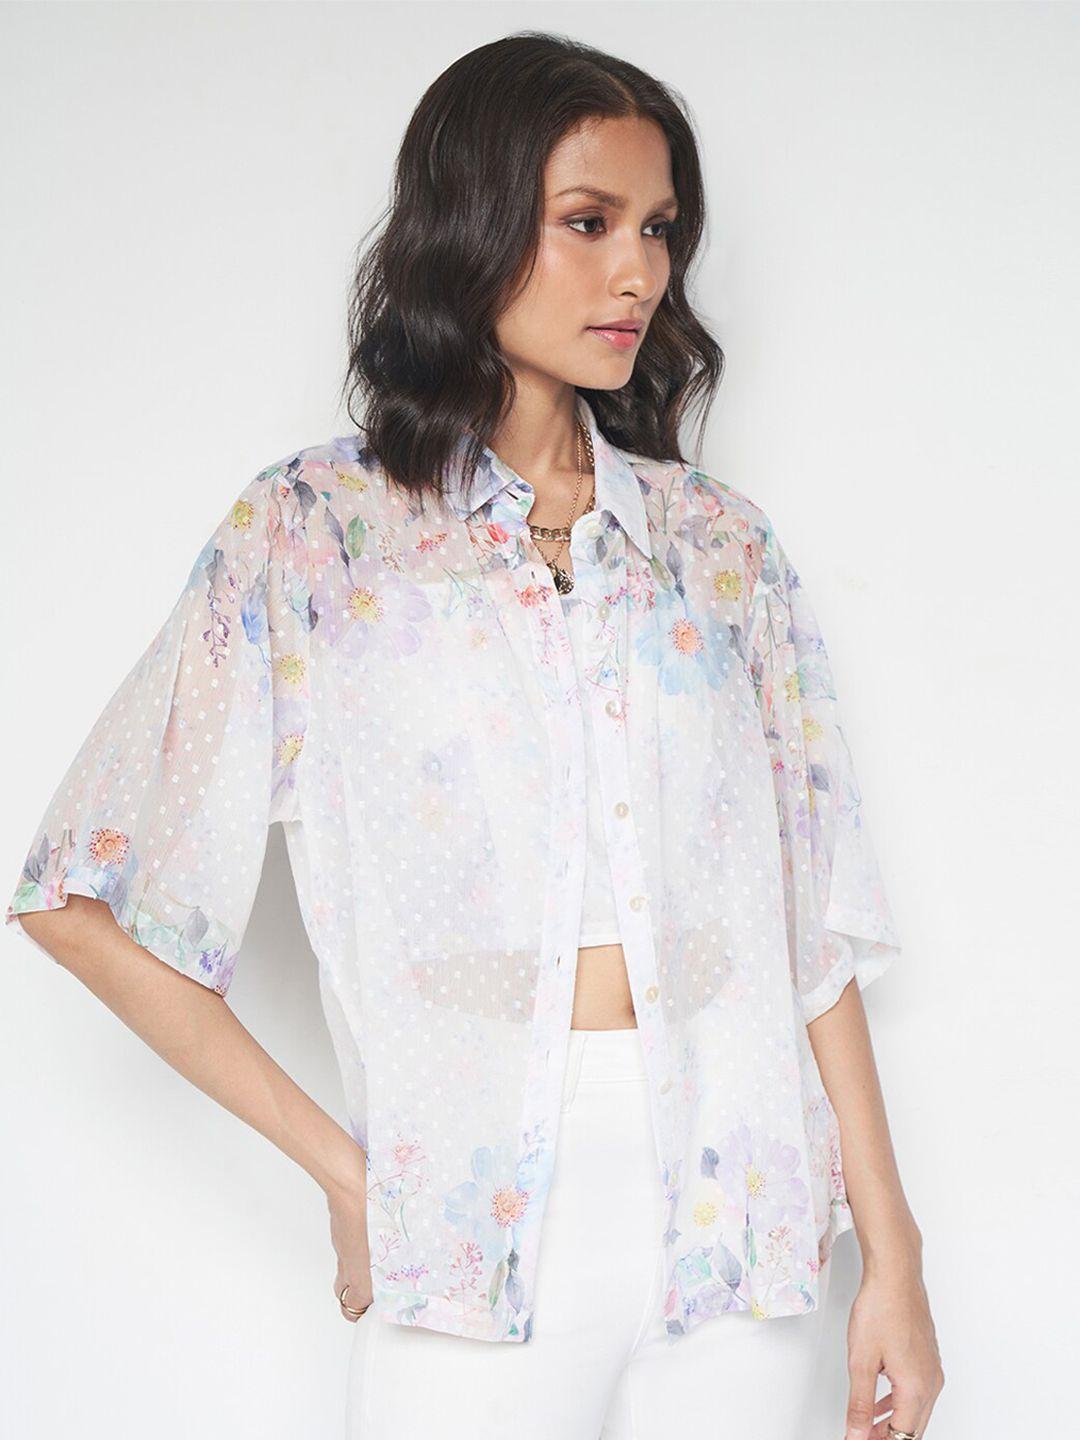 and floral print flared sleeve shirt style top